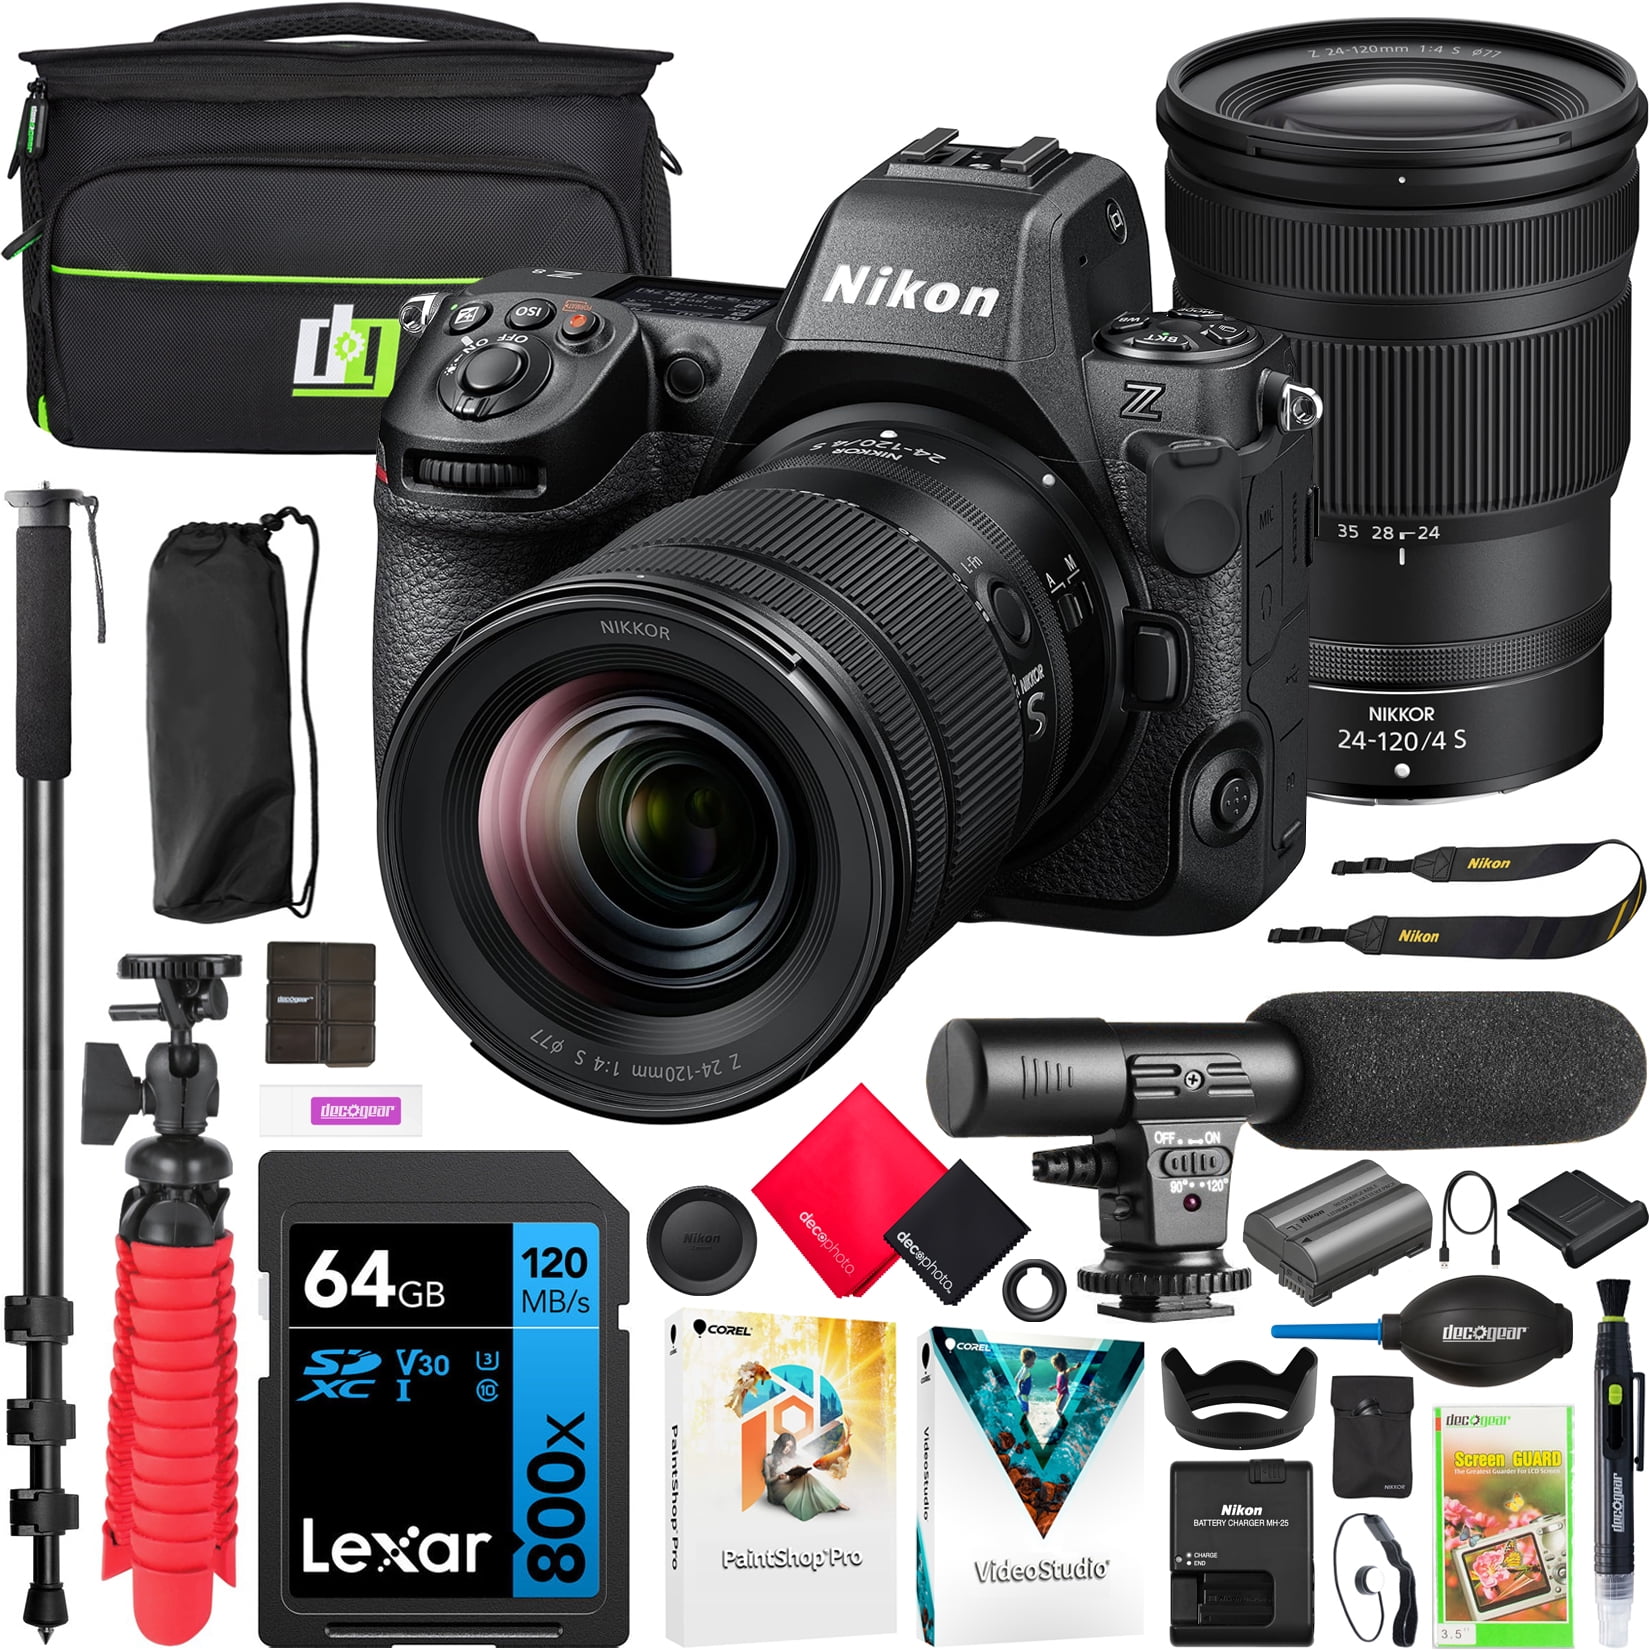 Nikon D850 45.7MP Full-Frame FX-Format Digital SLR Camera Body Bundle with  128GB Memory Card, Photo and Video Professional Editing Suite, Camera Bag